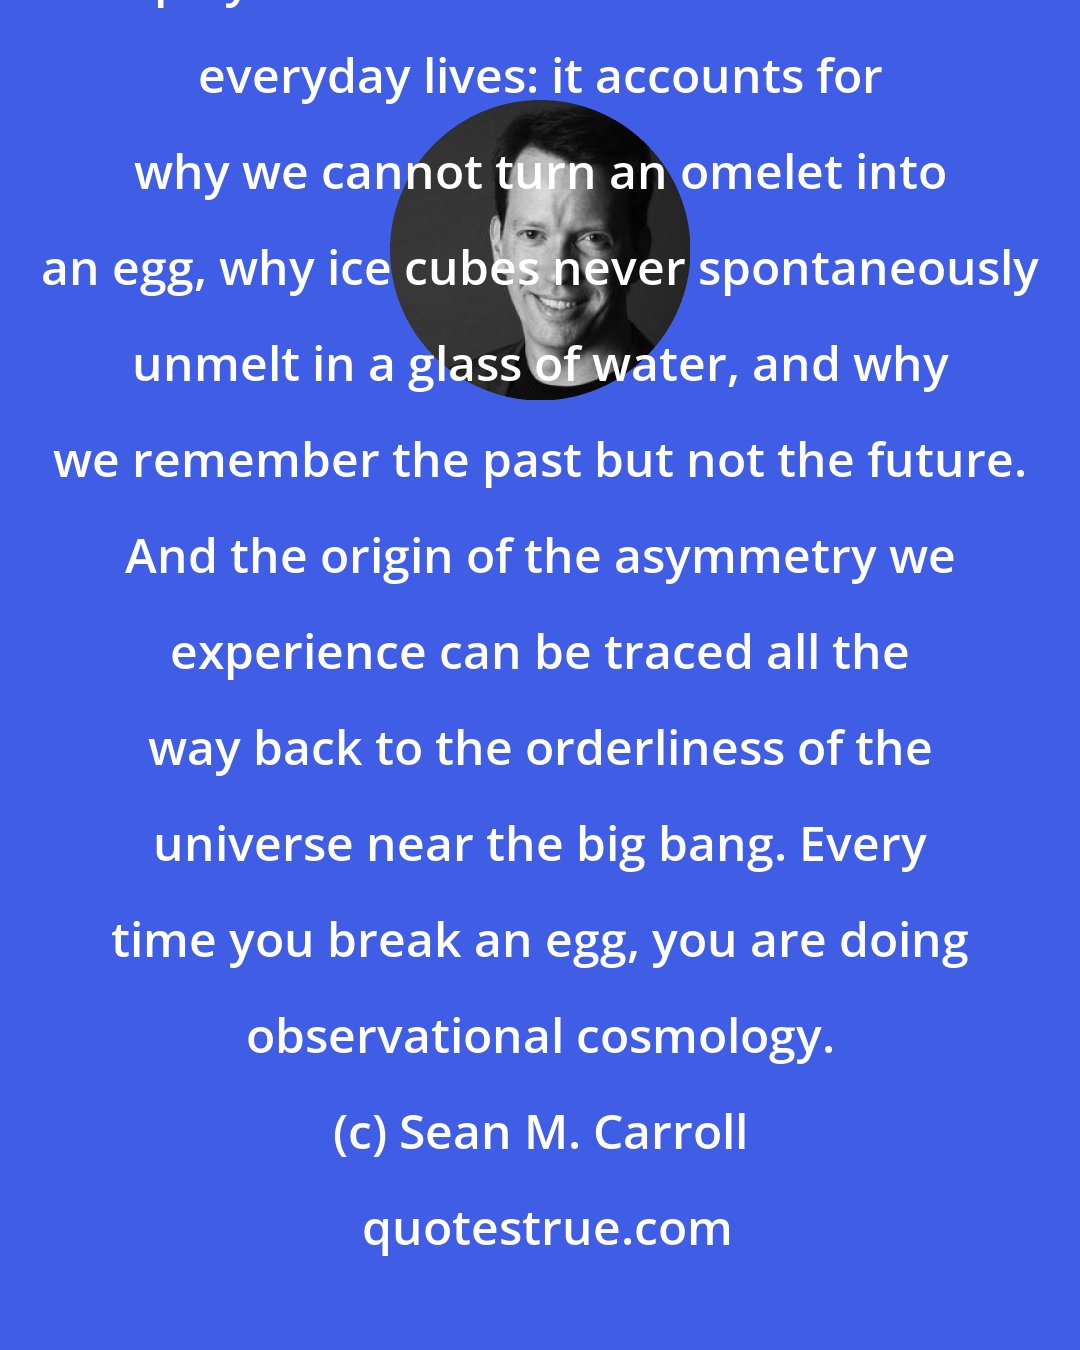 Sean M. Carroll: The asymmetry of time, the arrow that points from past to future, plays an unmistakable role in our everyday lives: it accounts for why we cannot turn an omelet into an egg, why ice cubes never spontaneously unmelt in a glass of water, and why we remember the past but not the future. And the origin of the asymmetry we experience can be traced all the way back to the orderliness of the universe near the big bang. Every time you break an egg, you are doing observational cosmology.